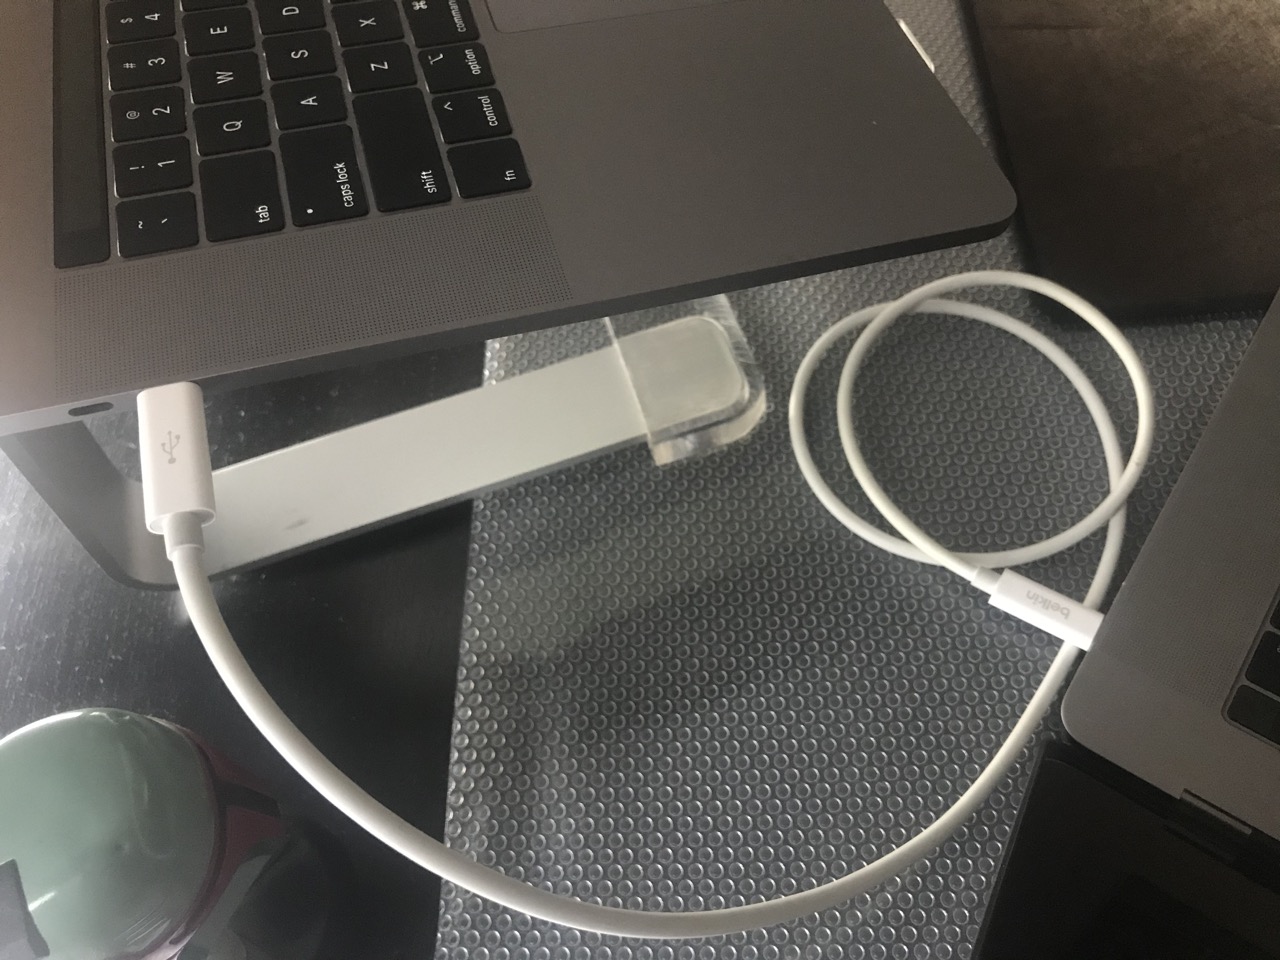 cables needed for target disk mode macbook air